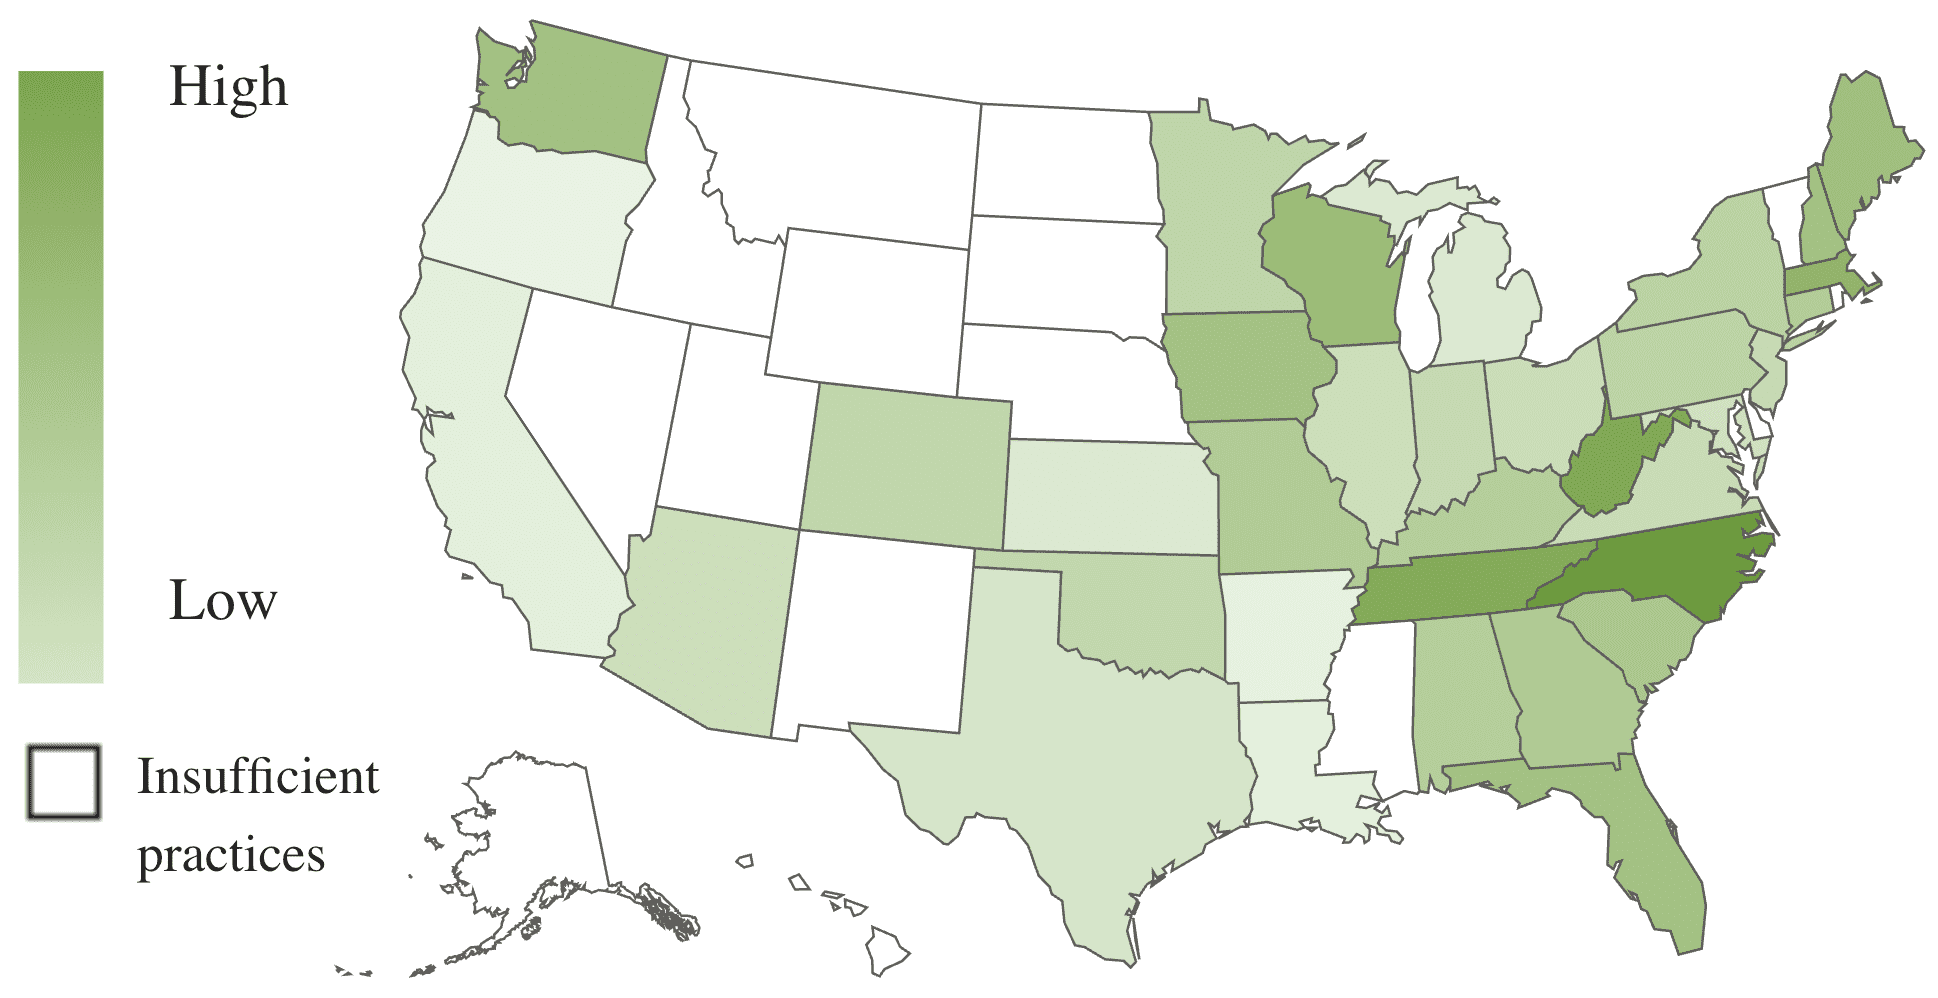 A U.S. map, using color shades to show revenue growth by state.